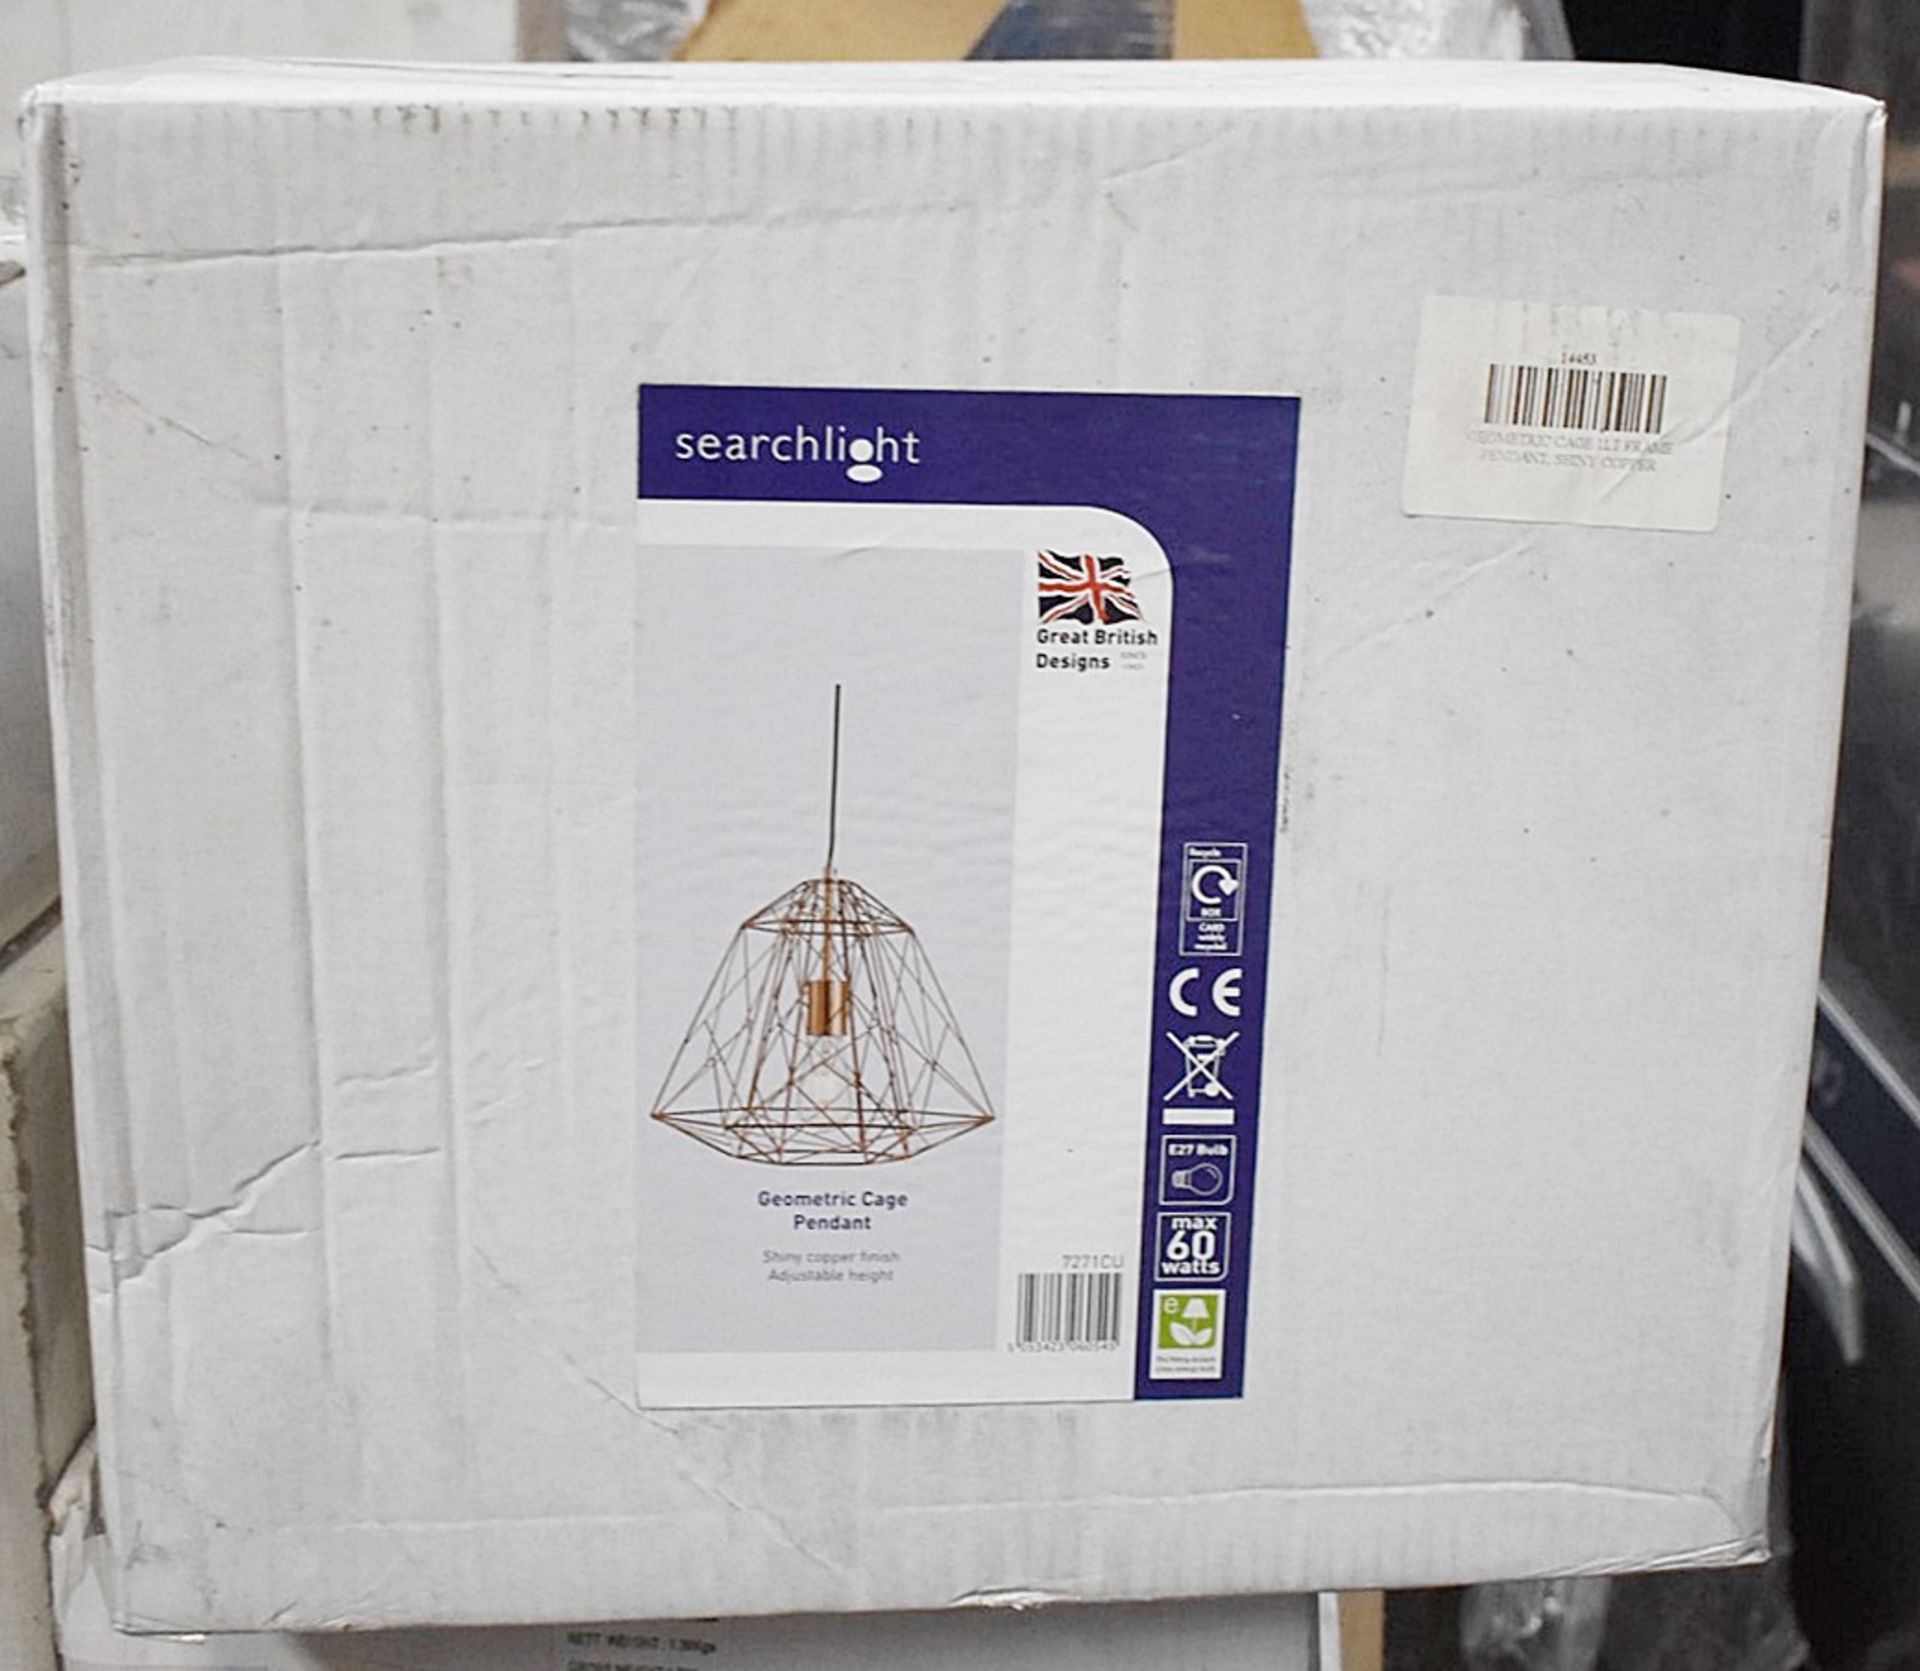 1 x Copper Geometric Cage Frame Pendant Light - New Boxed Stock - CL323 - Ref: 7271CU / PalH - Image 3 of 3